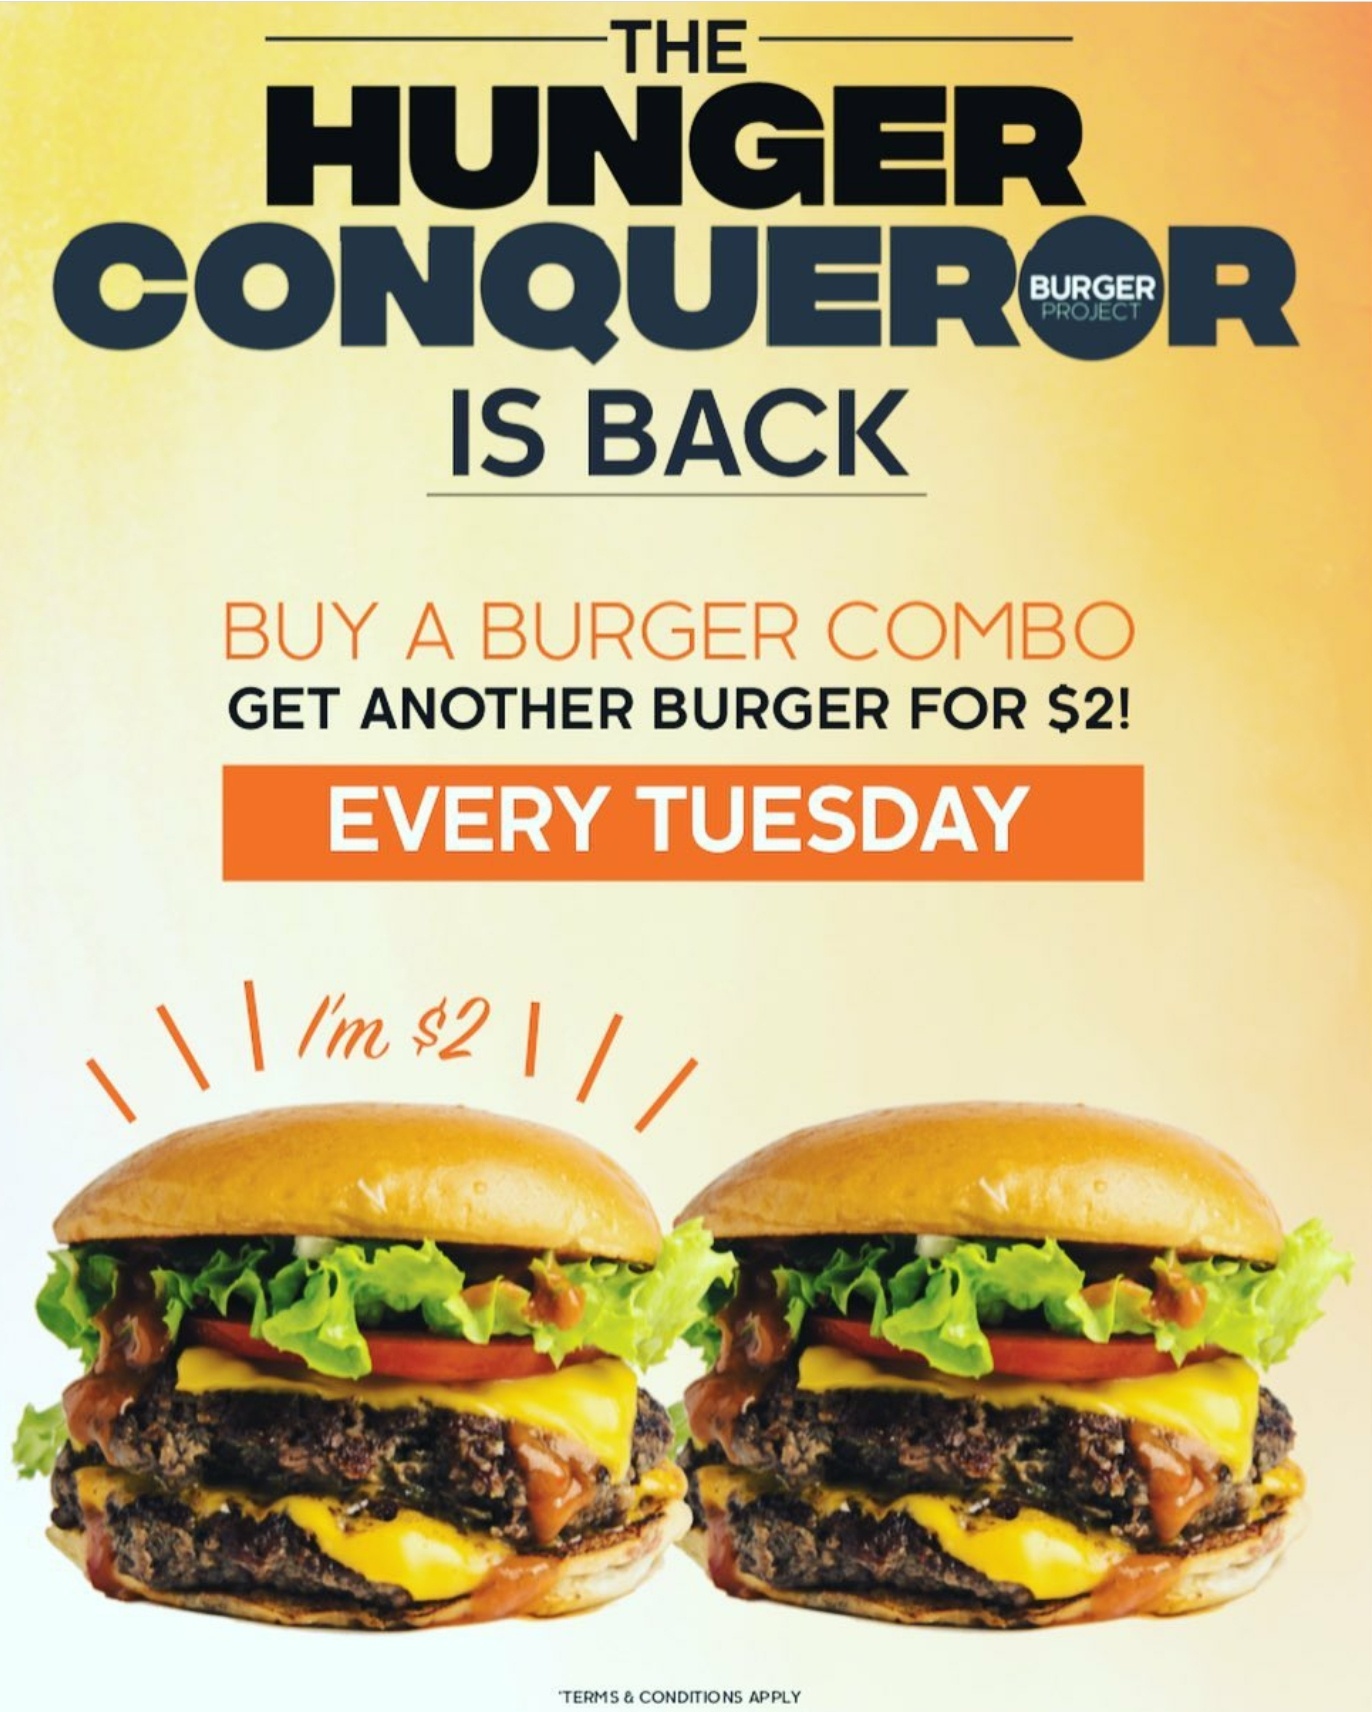 DEAL: Burger Project - Buy a Burger Combo, Get Another Burger for $2 on Tuesdays 4